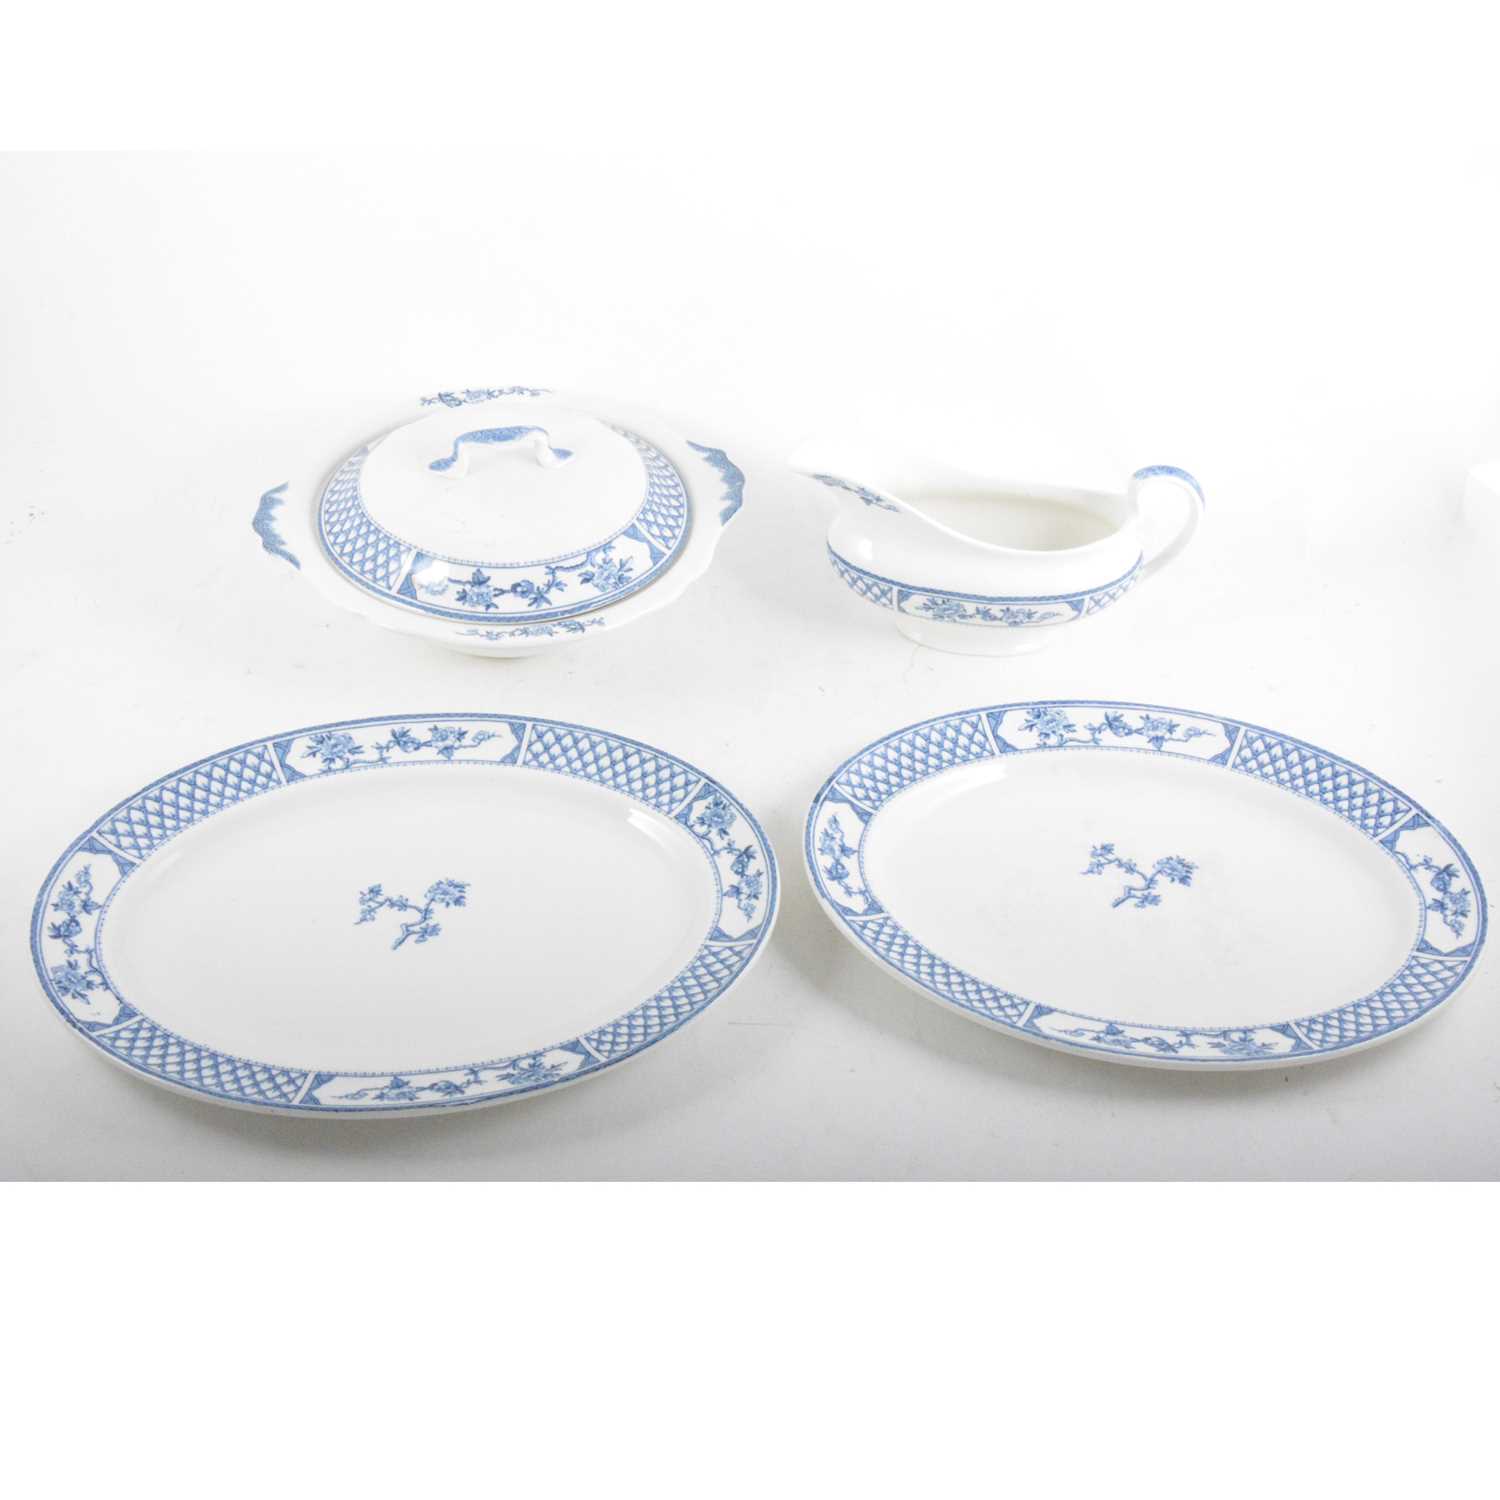 Lot 114 - A part dinner service by Johnson Bros, "The Exeter" pattern